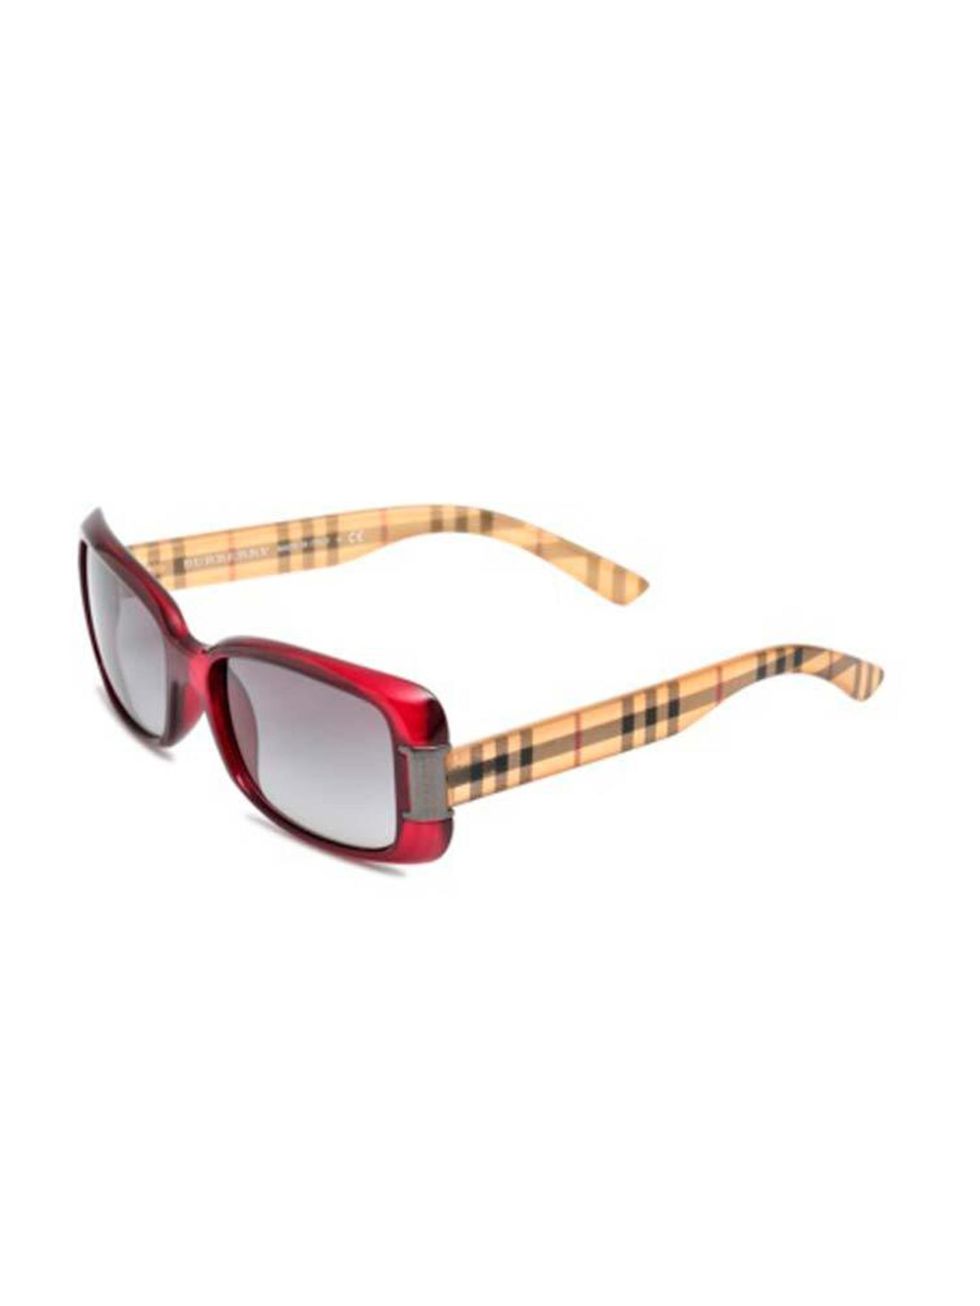 <p>Burberry sunglasses, available at <a href="http://www.monnierfreres.co.uk/gbuk/sunglasses/squared-frames/acetate-sunglasses_p10936618.html" target="_blank">Monnier Fr&egrave;res</a>, &pound;131<br />
&nbsp;</p>